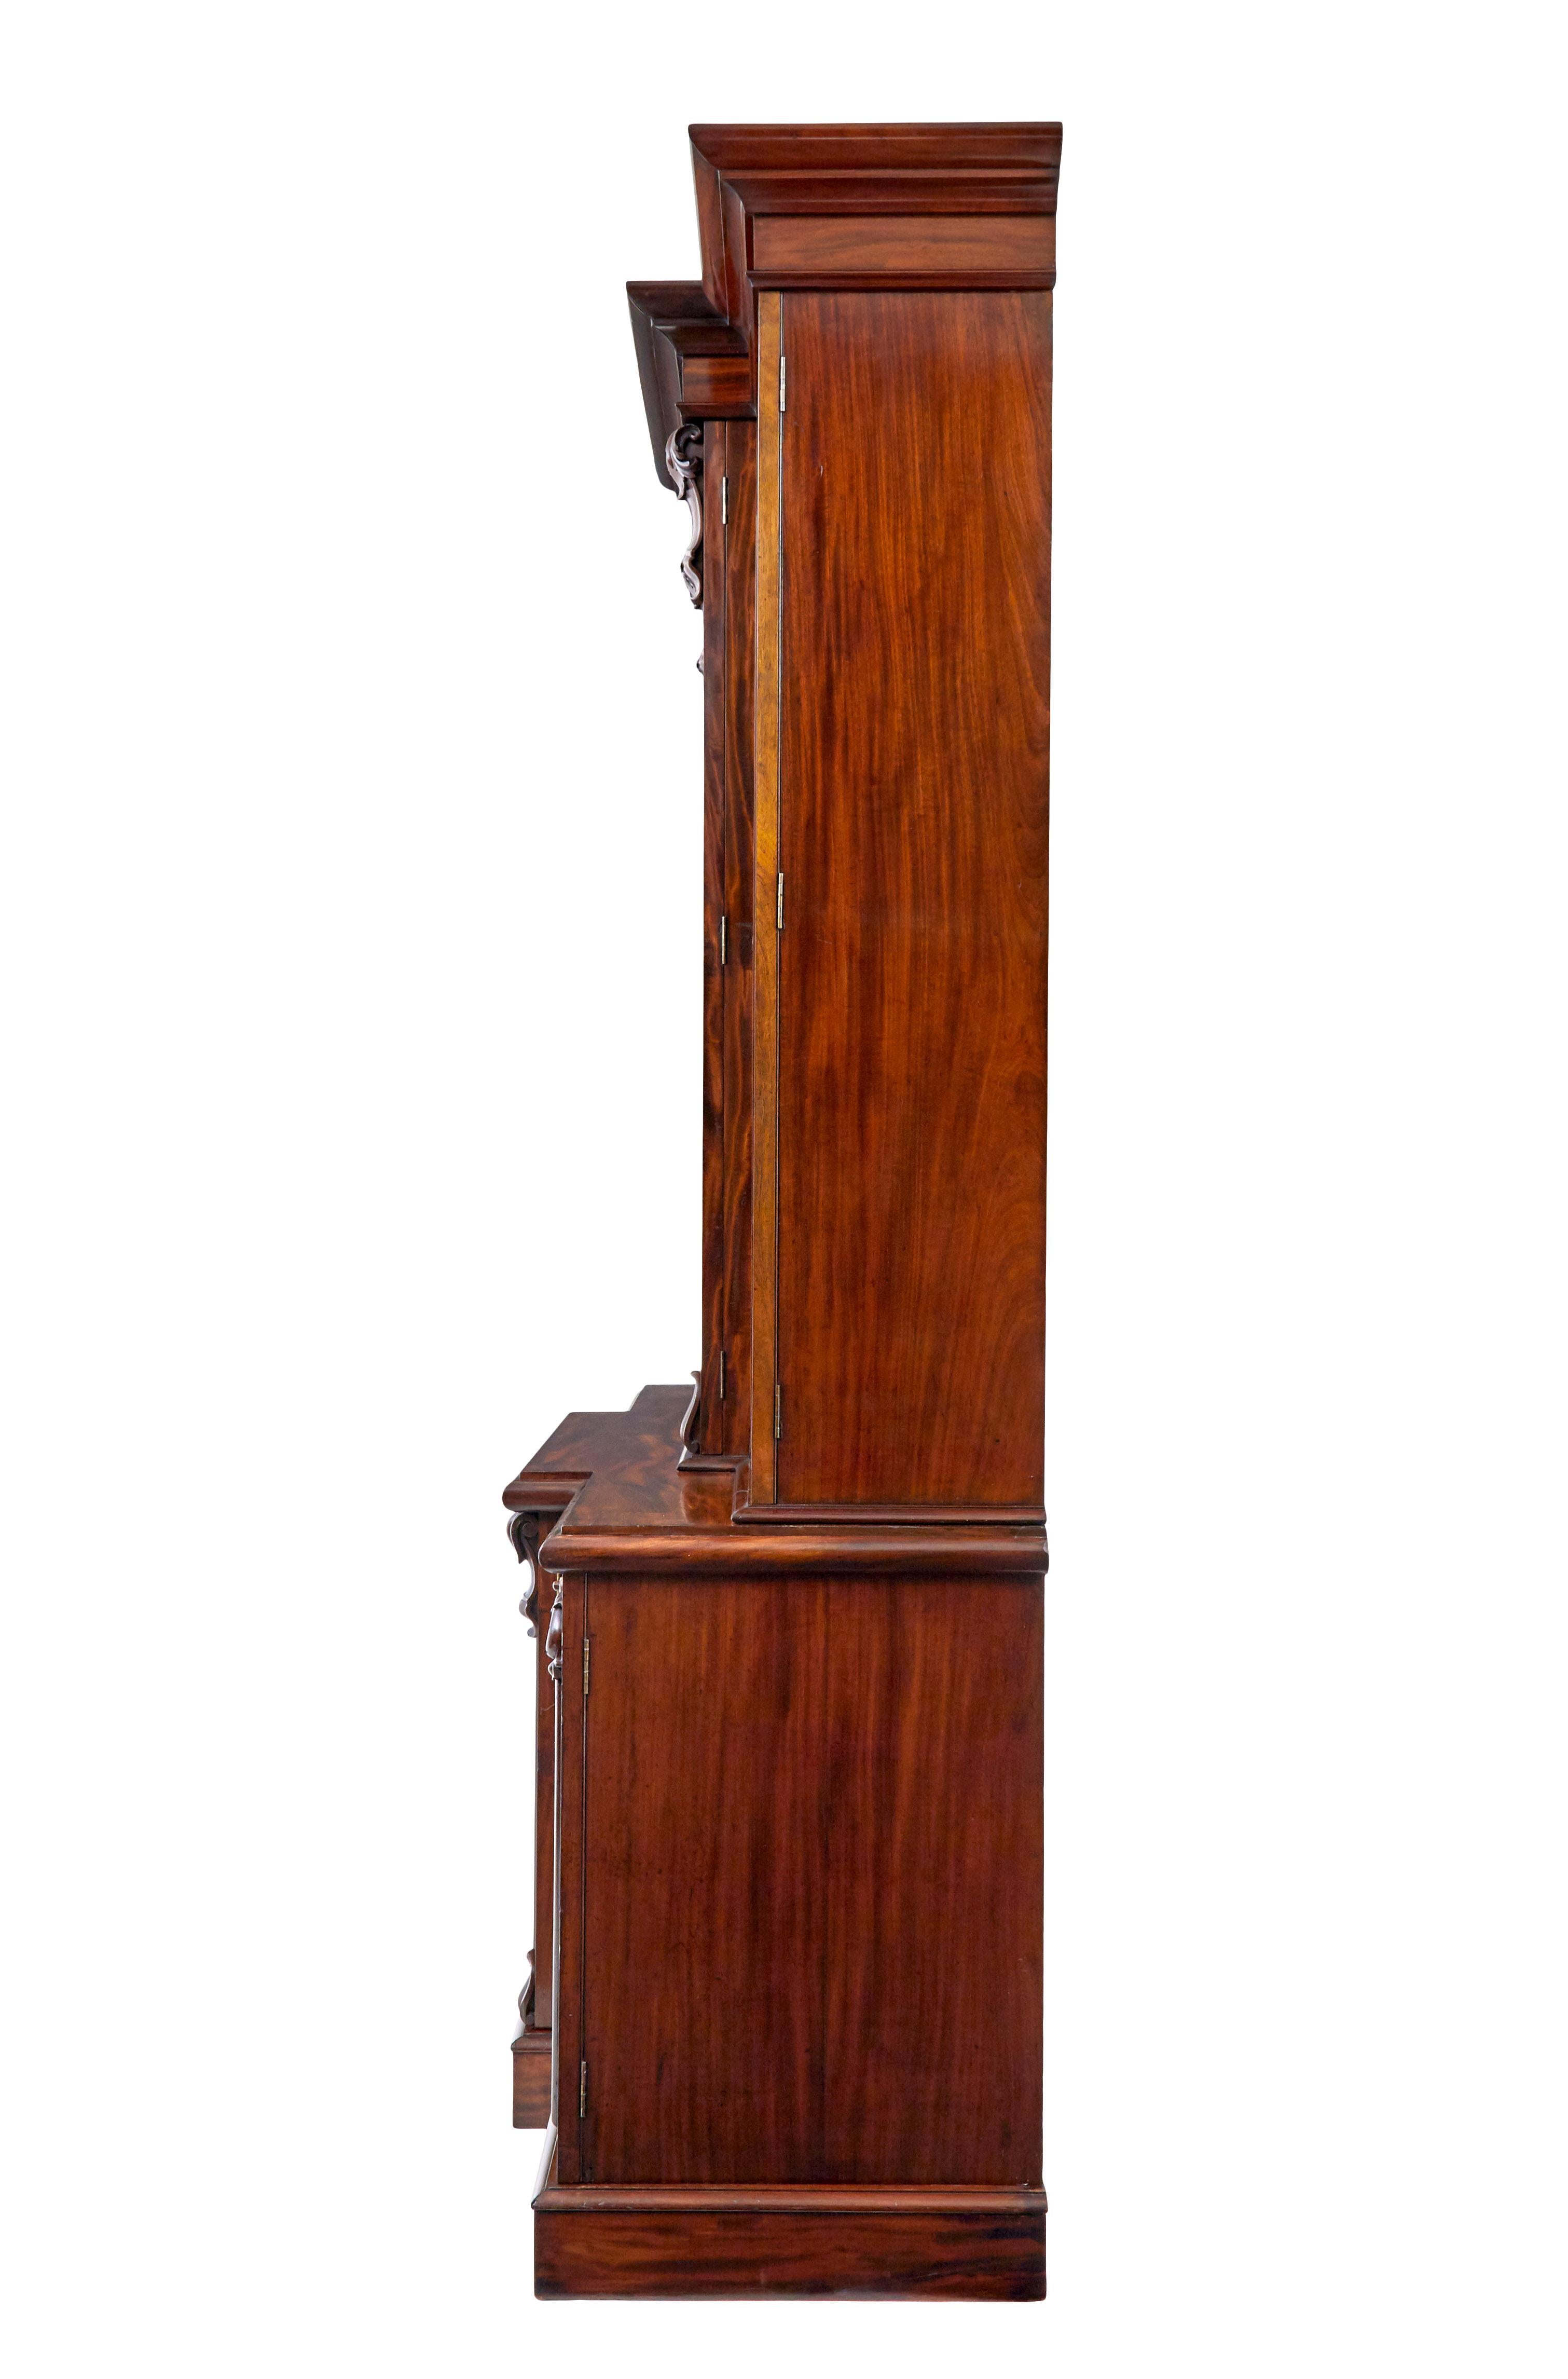 Glass Early Victorian 19th century flame mahogany breakfront bookcase For Sale